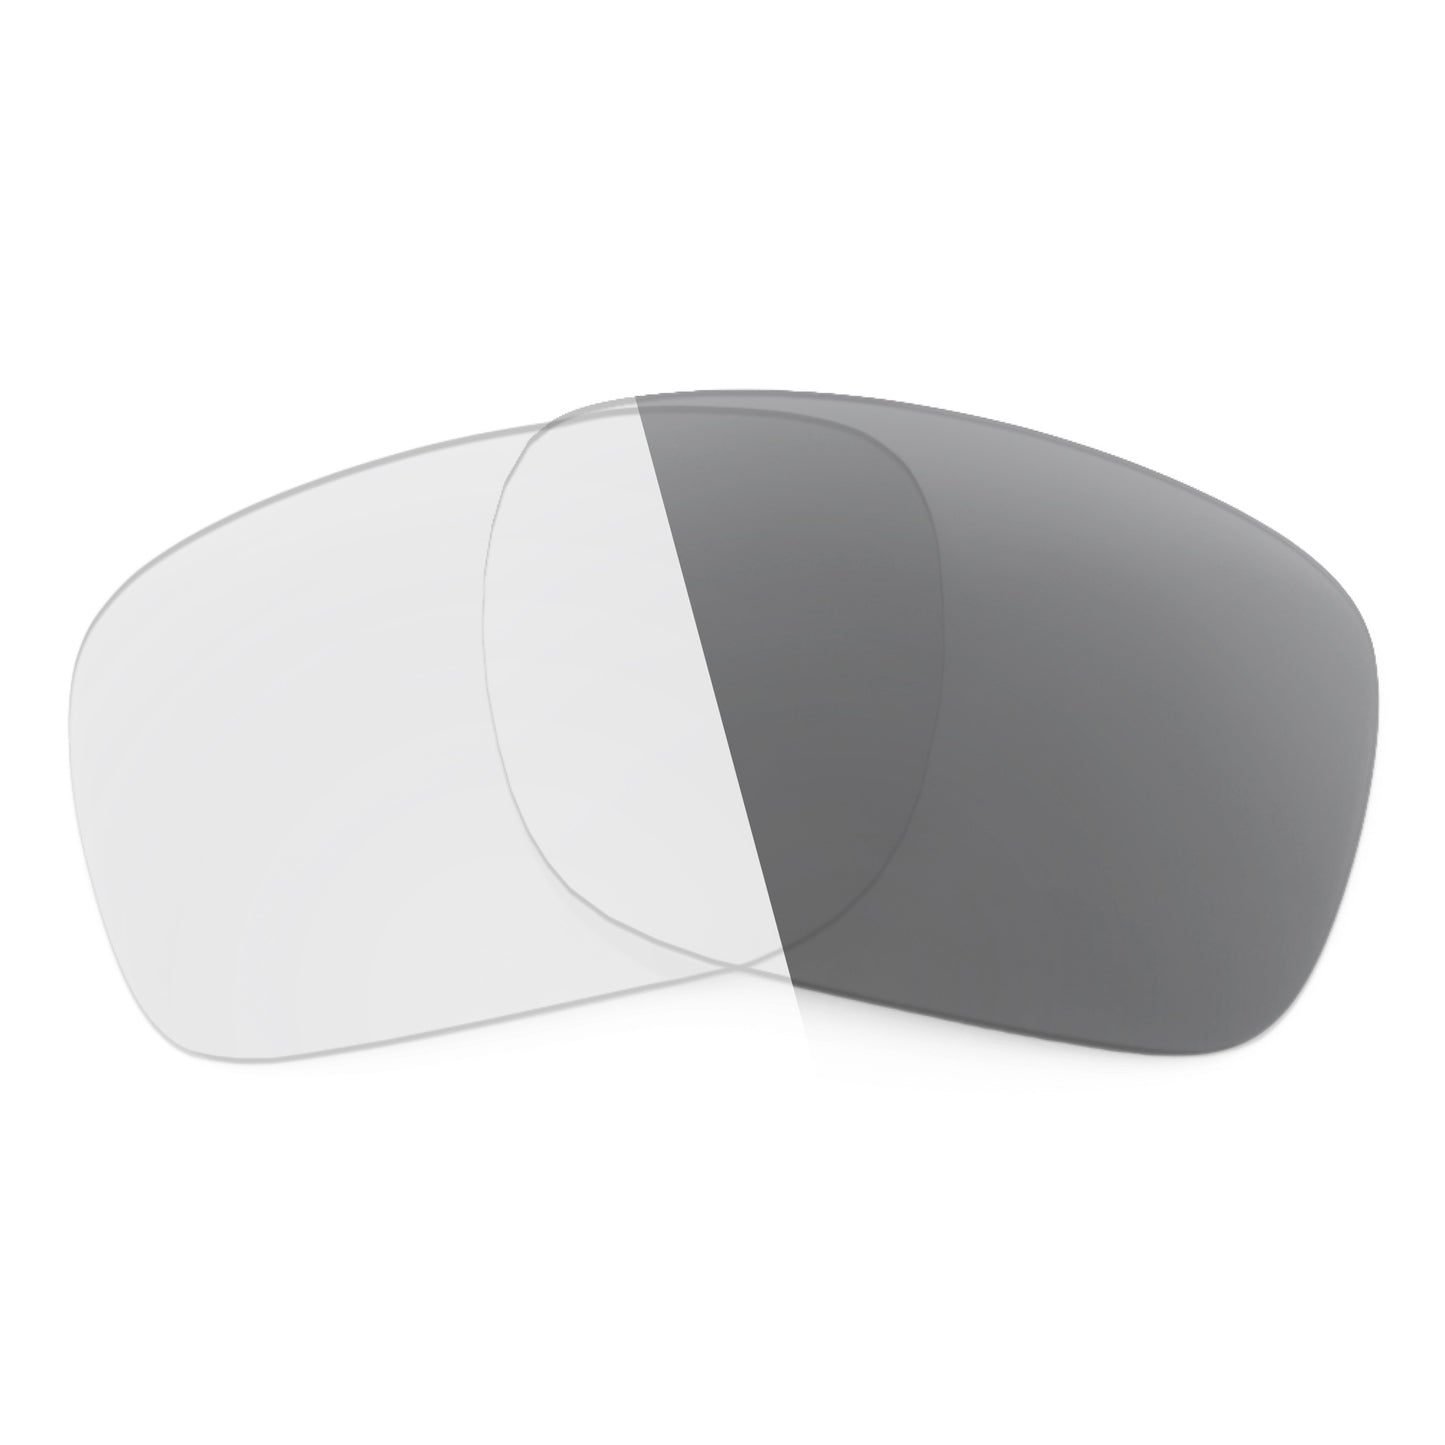 Revant replacement lenses for Wiley X Kingpin Non-Polarized Adapt Gray Photochromic